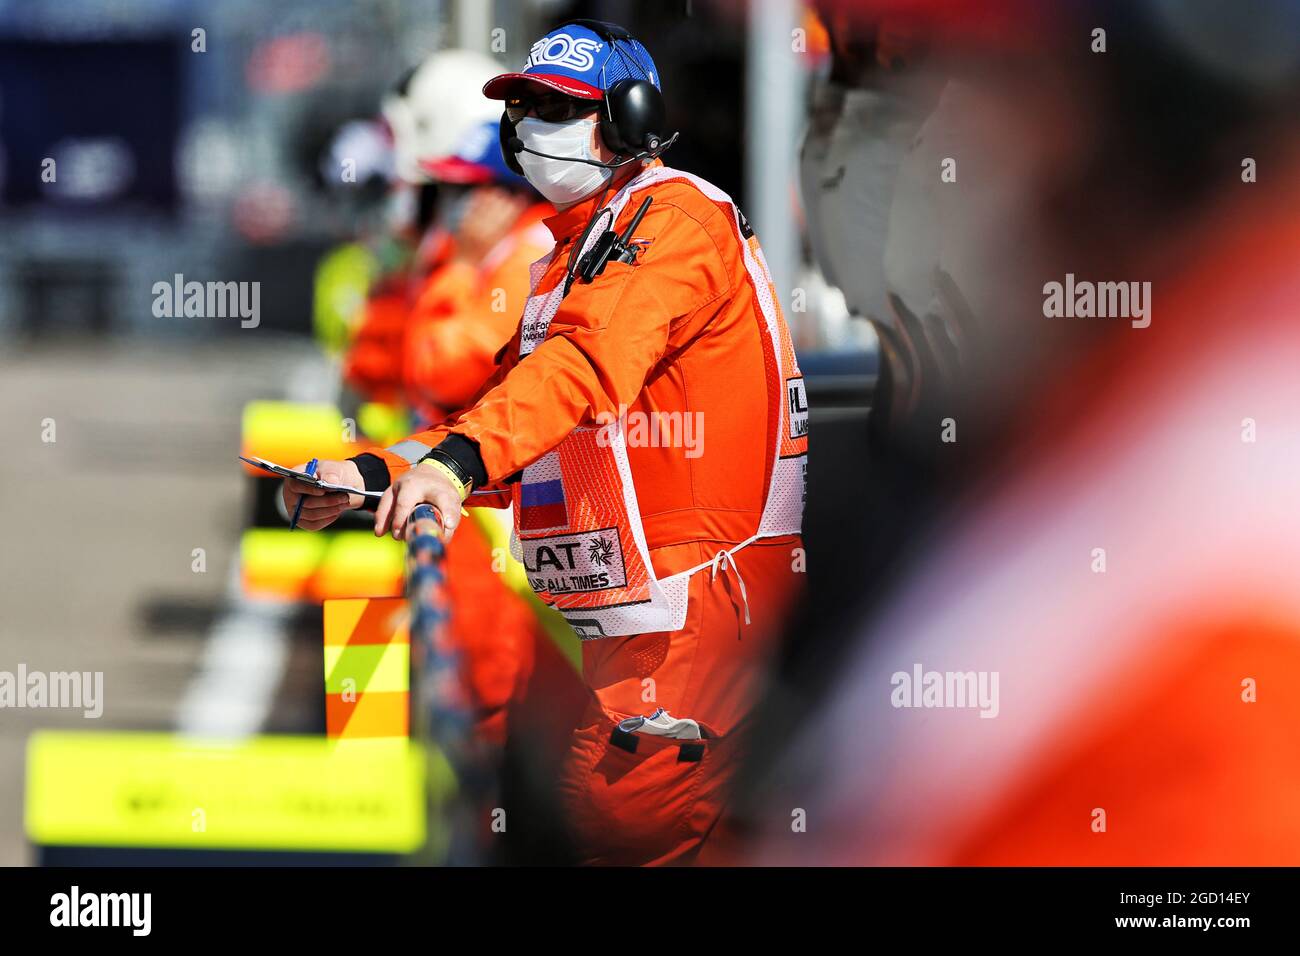 Circuit atmosphere - marshal in the pits. Russian Grand Prix, Friday 25th September 2020. Sochi Autodrom, Sochi, Russia. Stock Photo